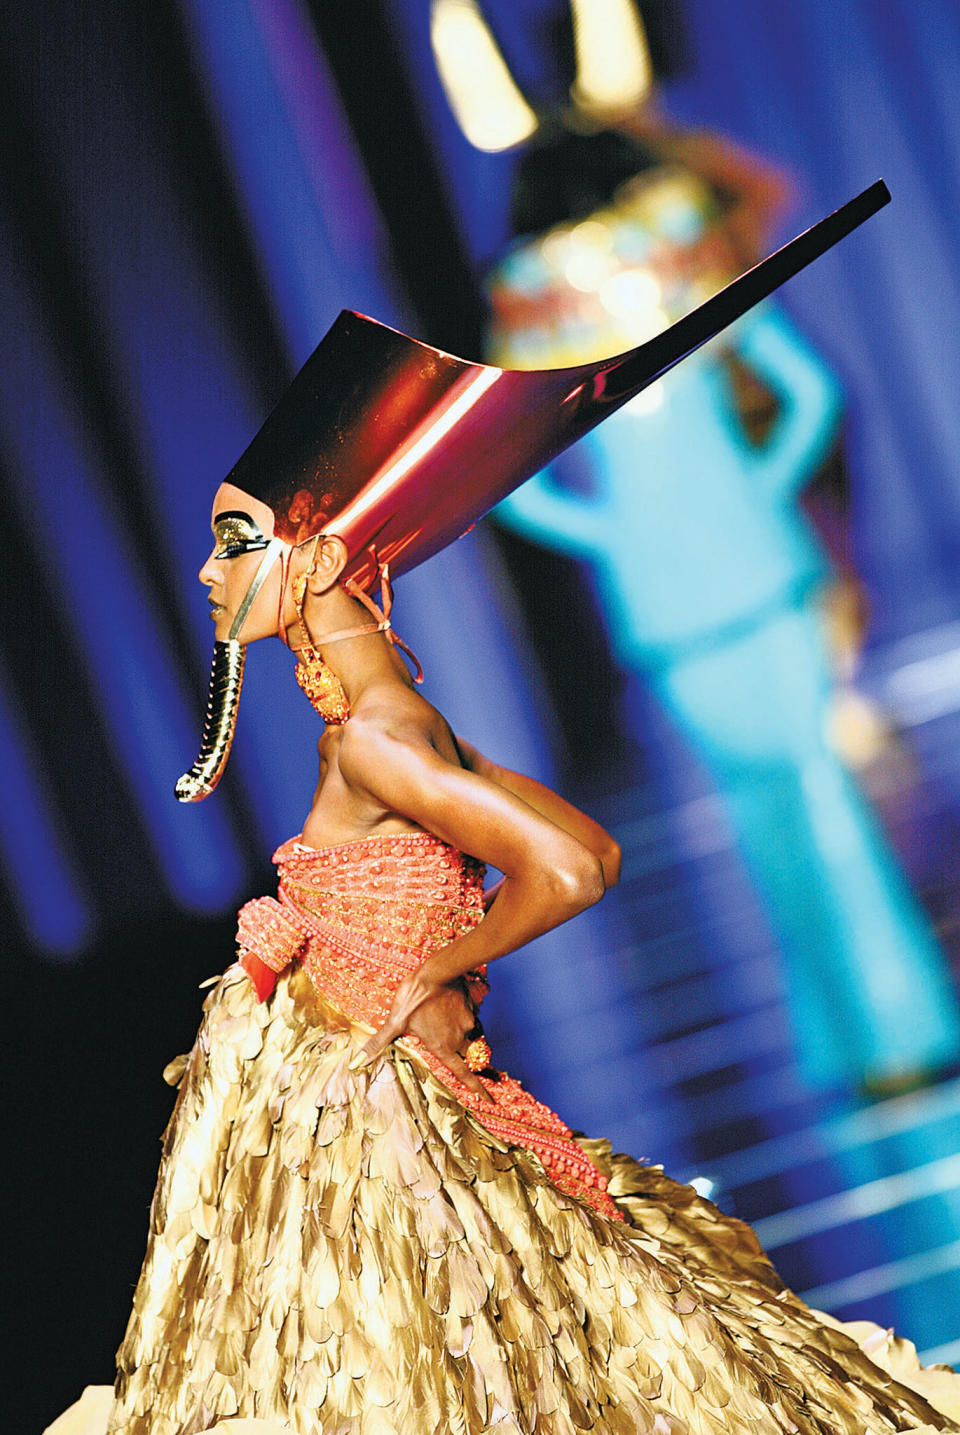 Model on the runway wearing Dior Couture spring 2004 Nefertiti look.